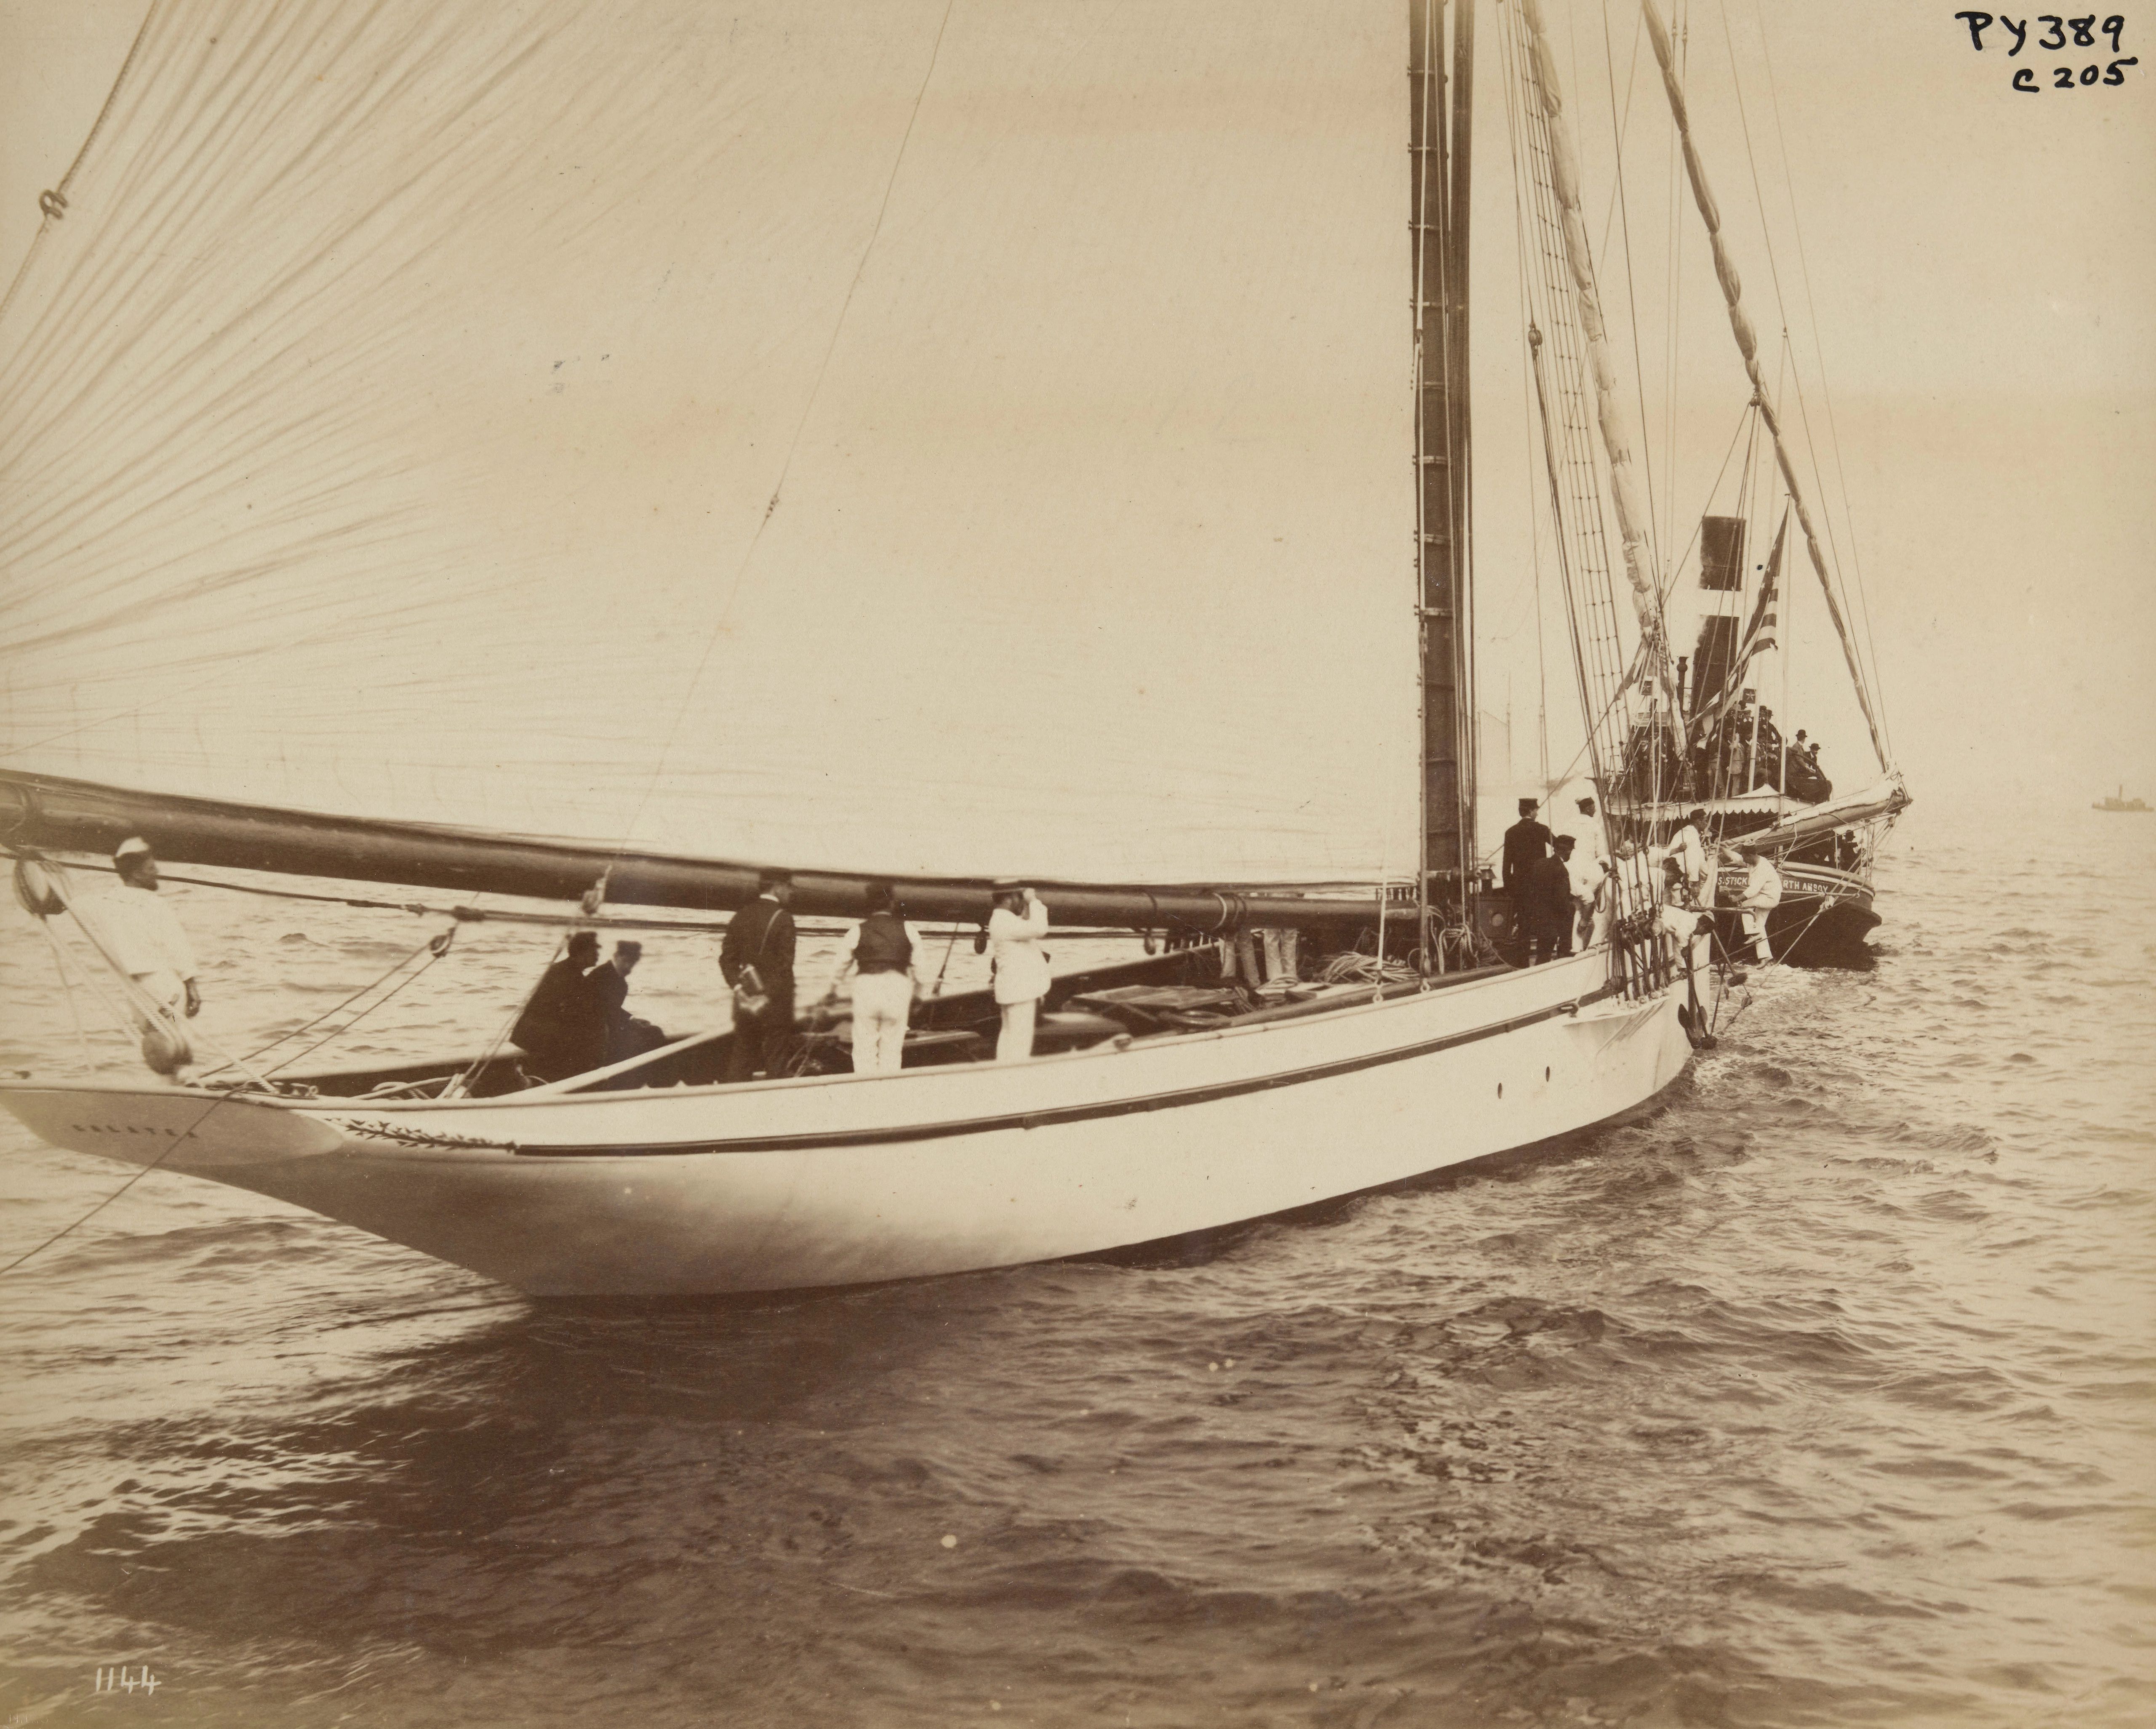 This image of Galatea shows the white hull of the yacht on the day of the first 1886, America’s Cup Race. Galatea, first race for the America’s Cup.